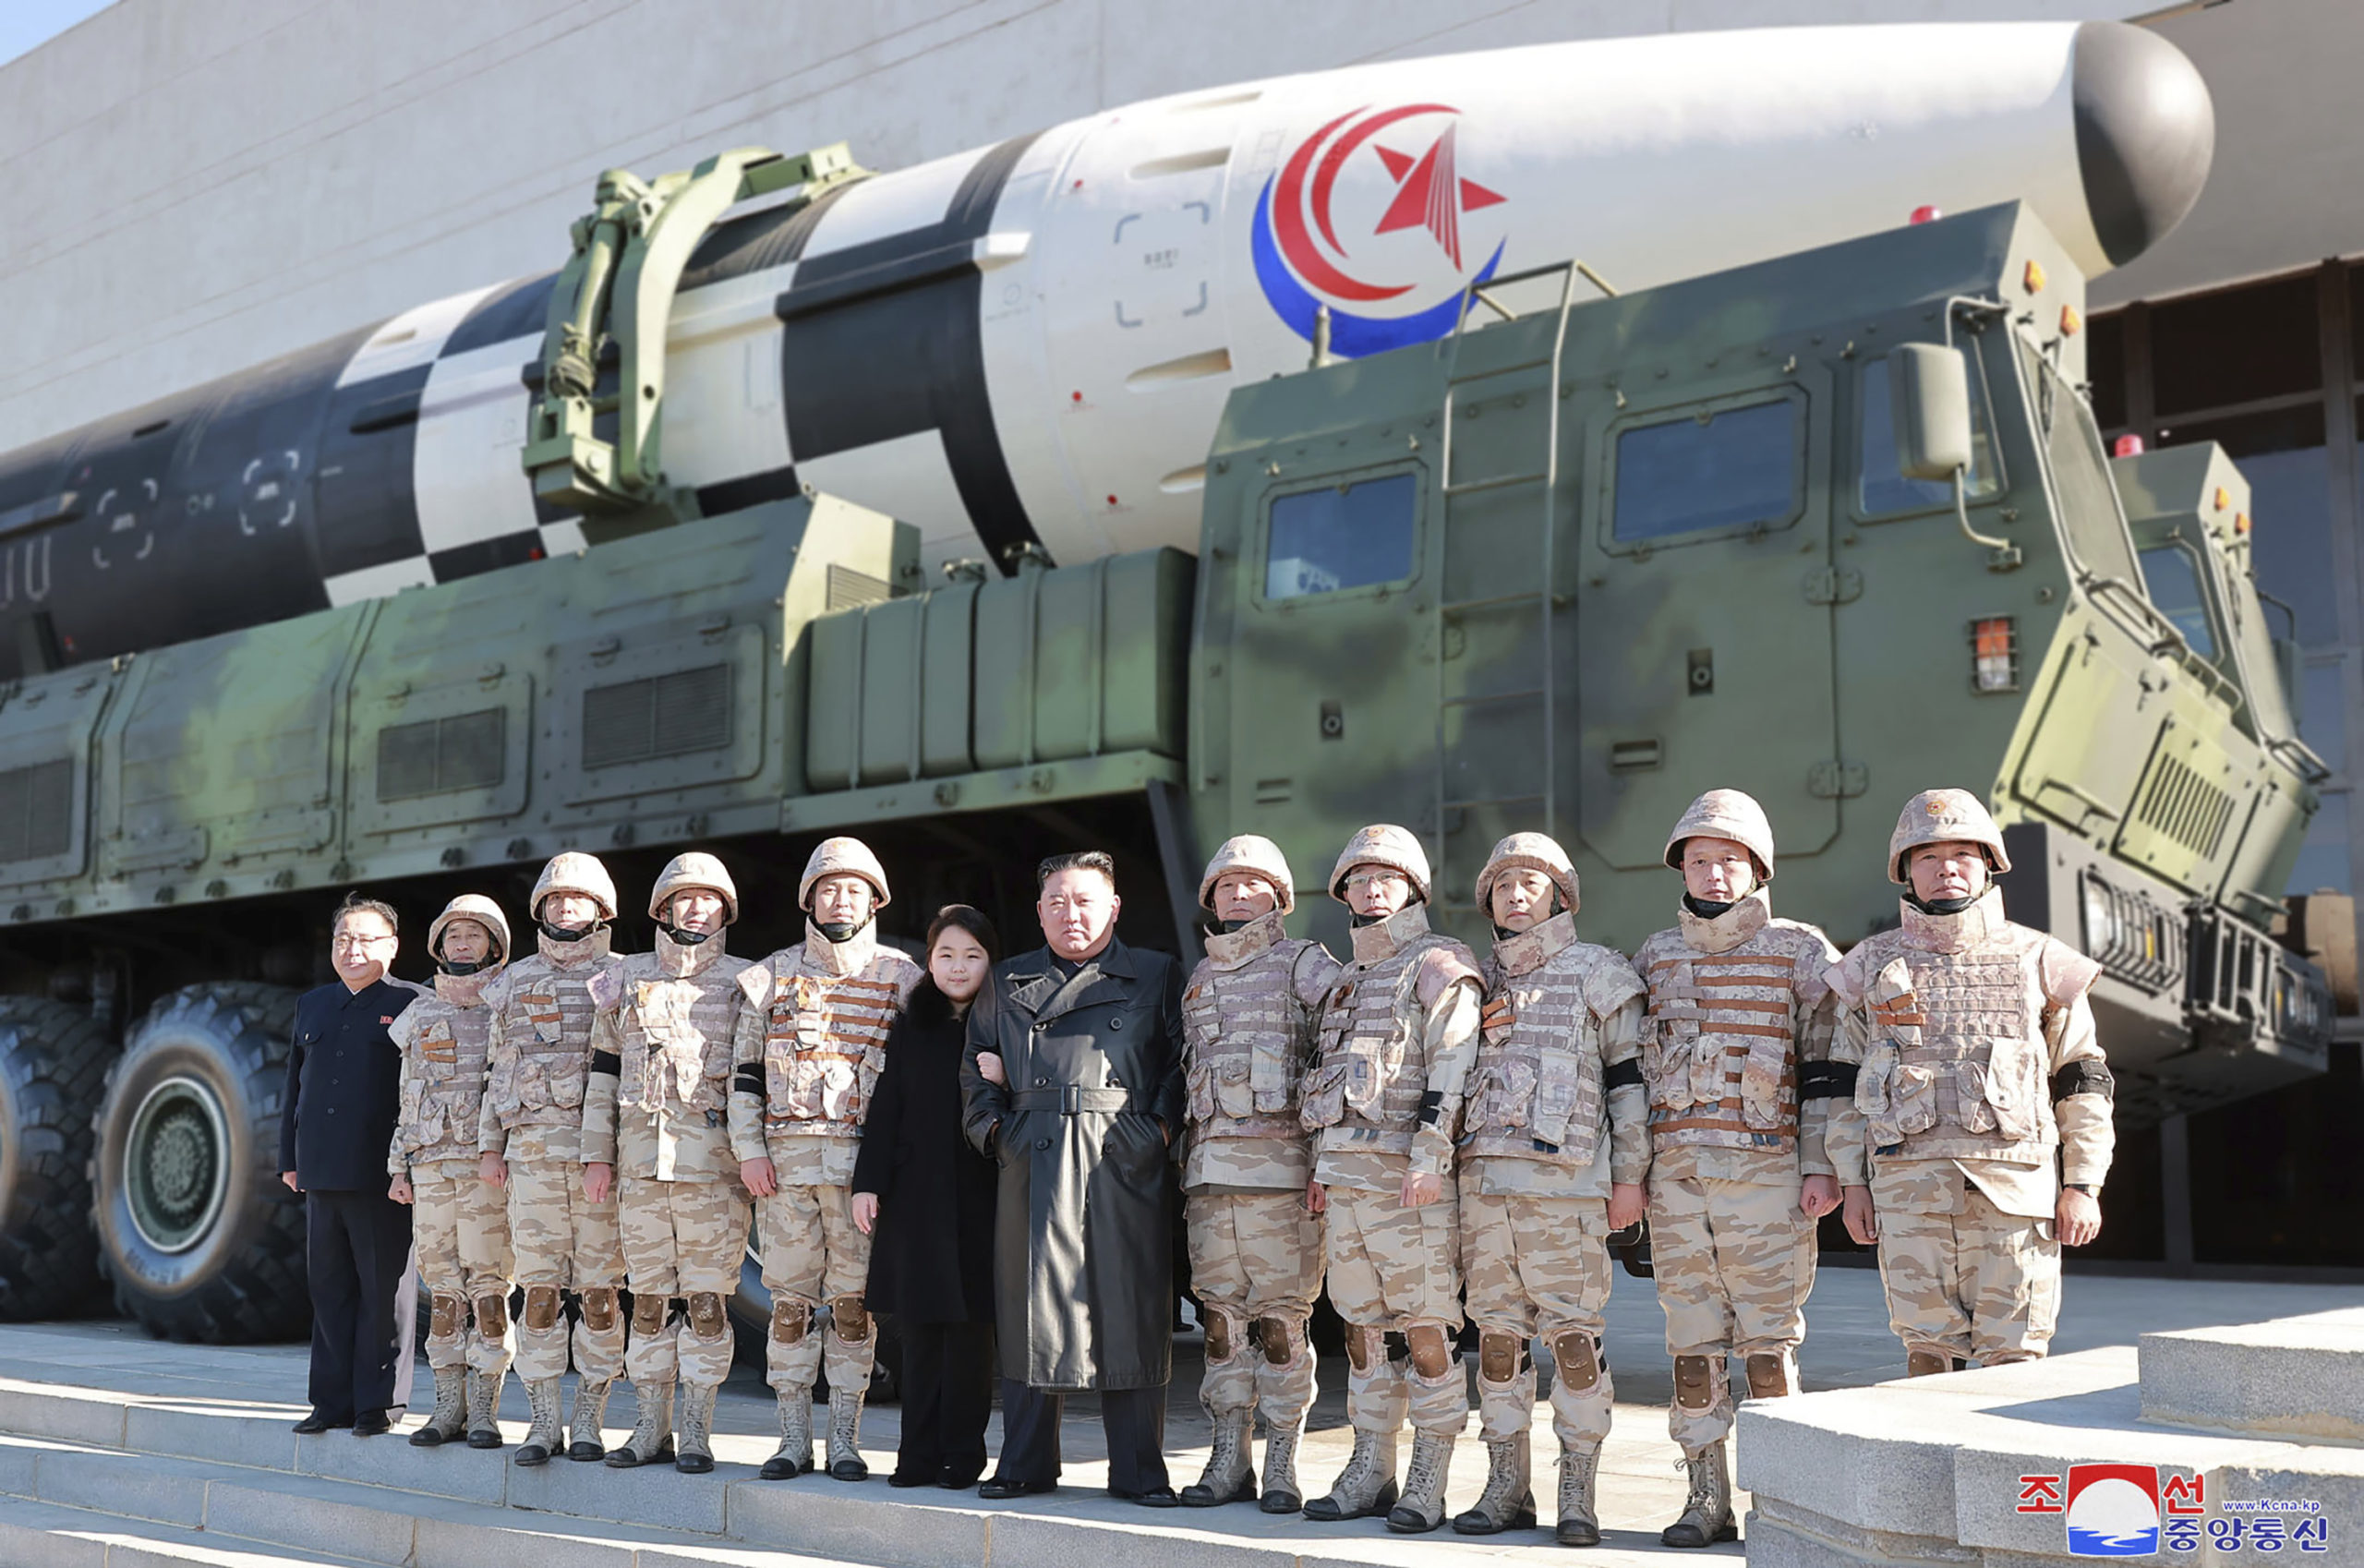 North Korean leader Kim Jong Un, center, and his daughter, center left, pose with soldiers in front of the Hwasong-17 intercontinental ballistic missile in North Korea.